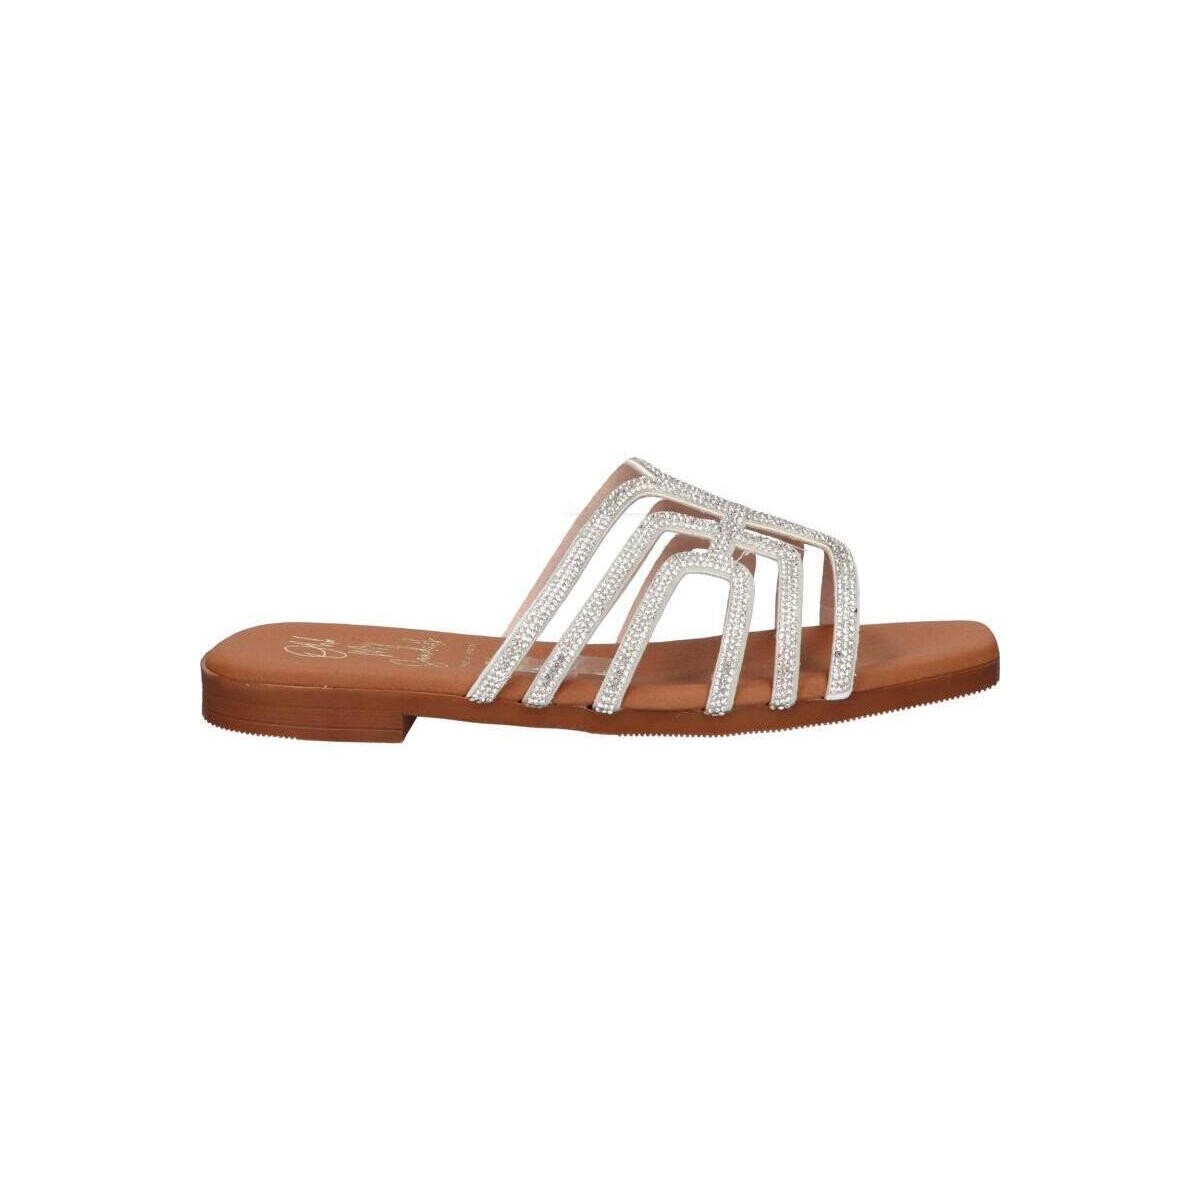 Sapatos Mulher Chinelos Oh My Sandals 5326 P31 5326 P31 